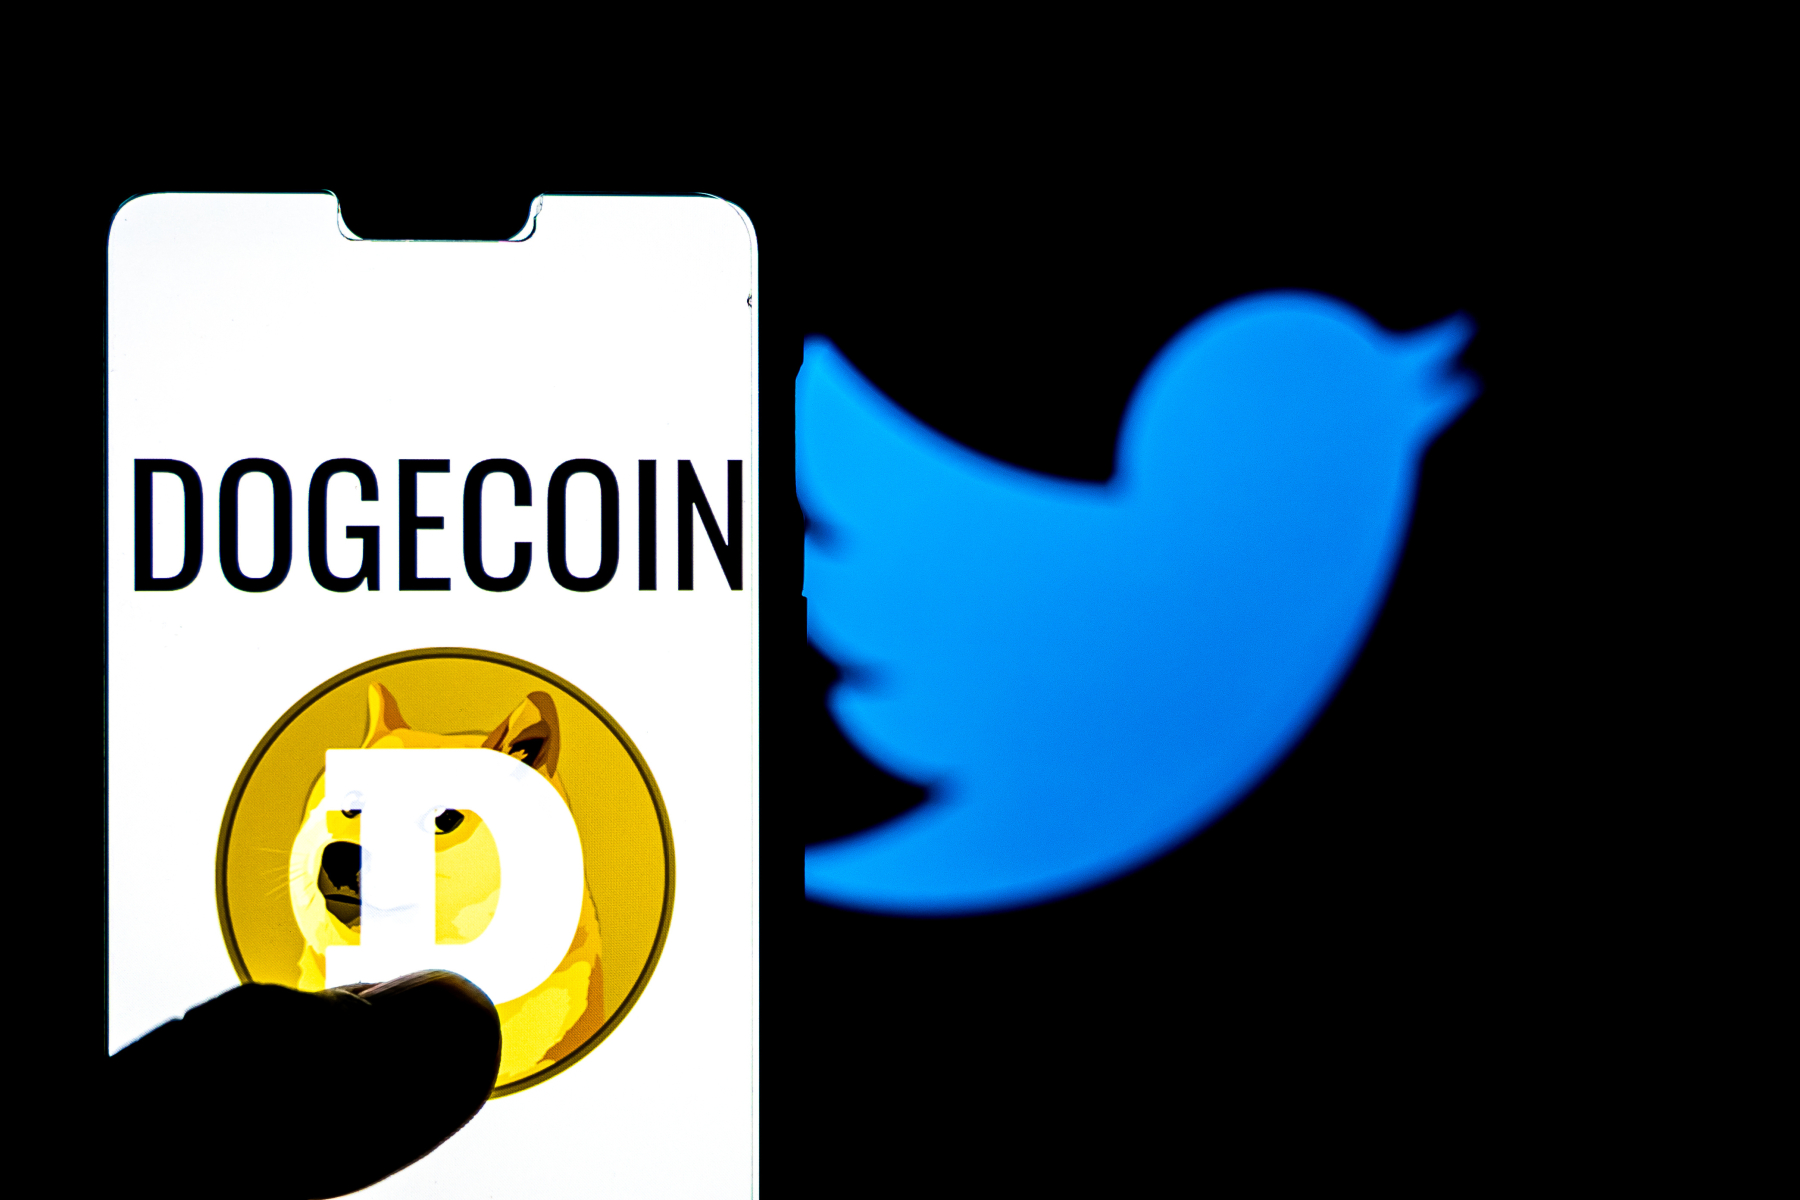 Elon Musk hints at Dogecoin payments on Twitter
